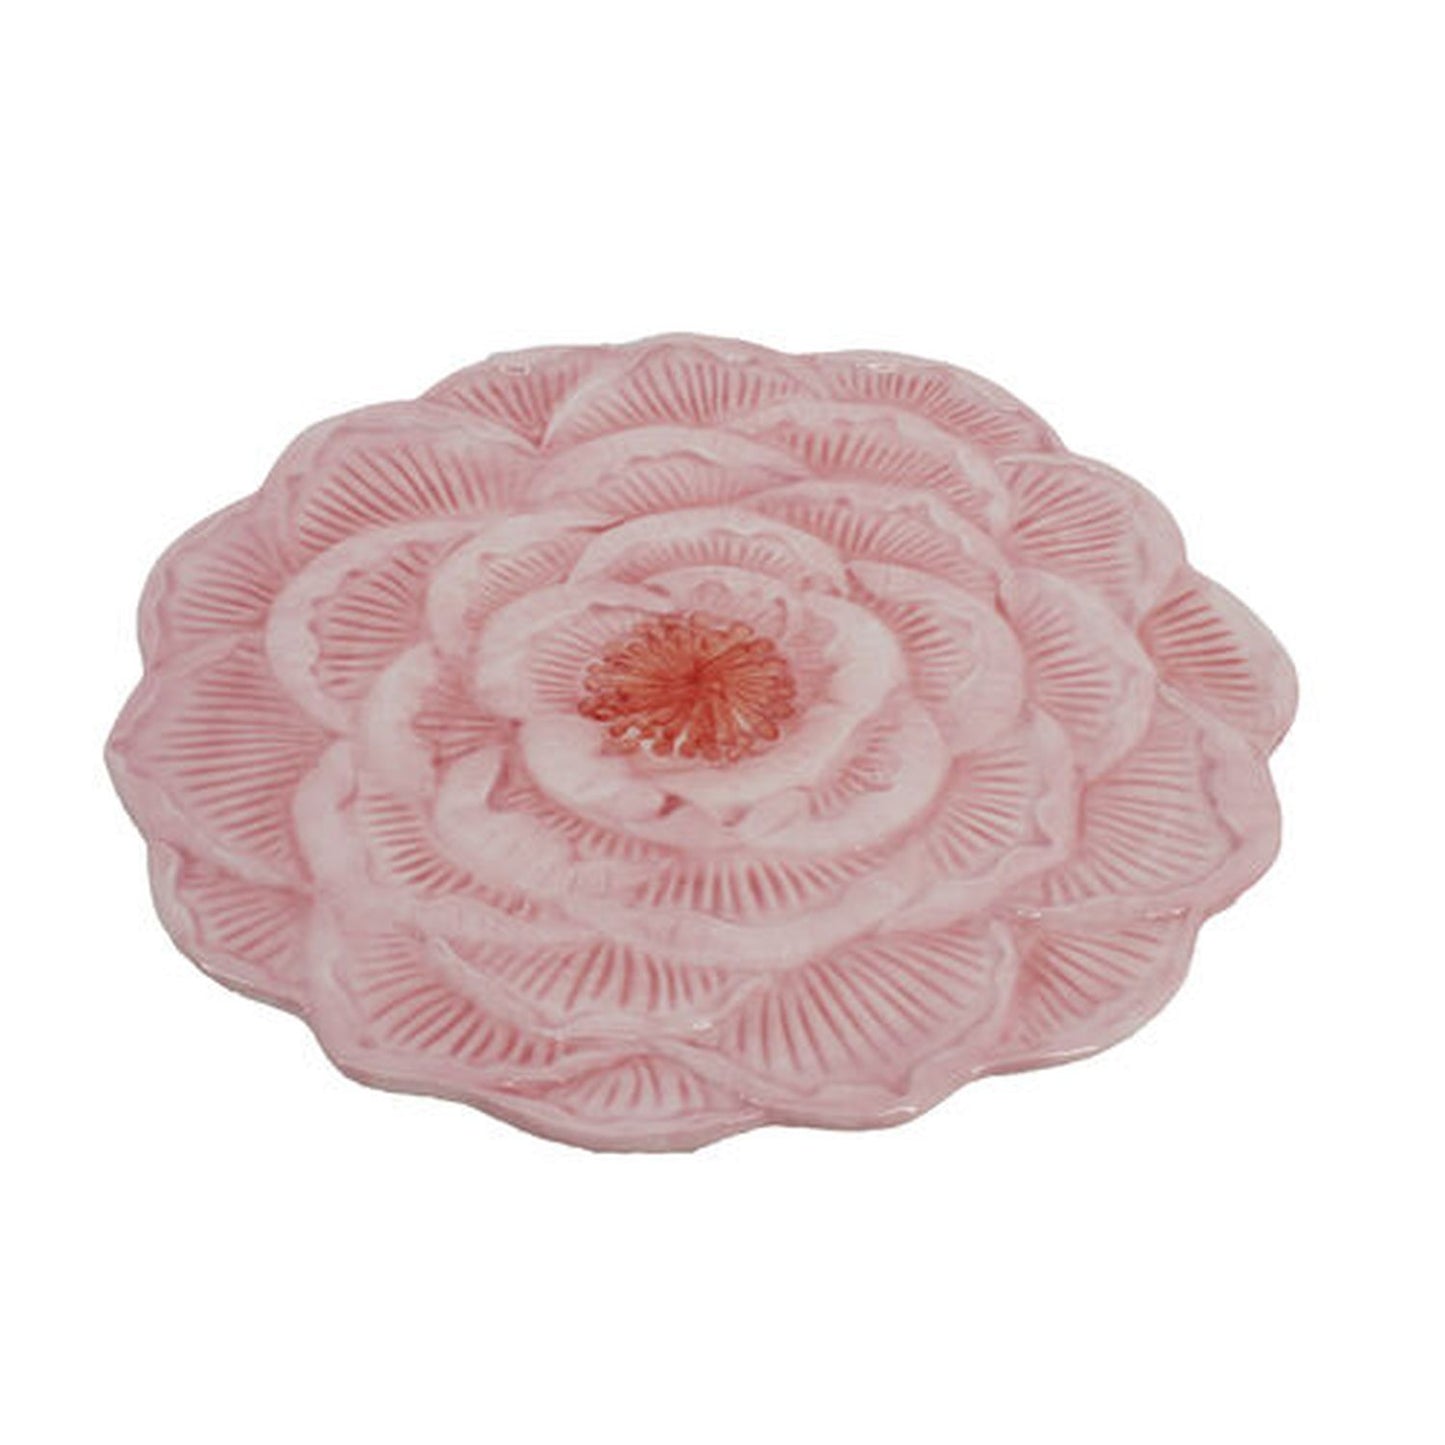 December Diamonds Spring Confections 10" Pink Peony Plate Figurine